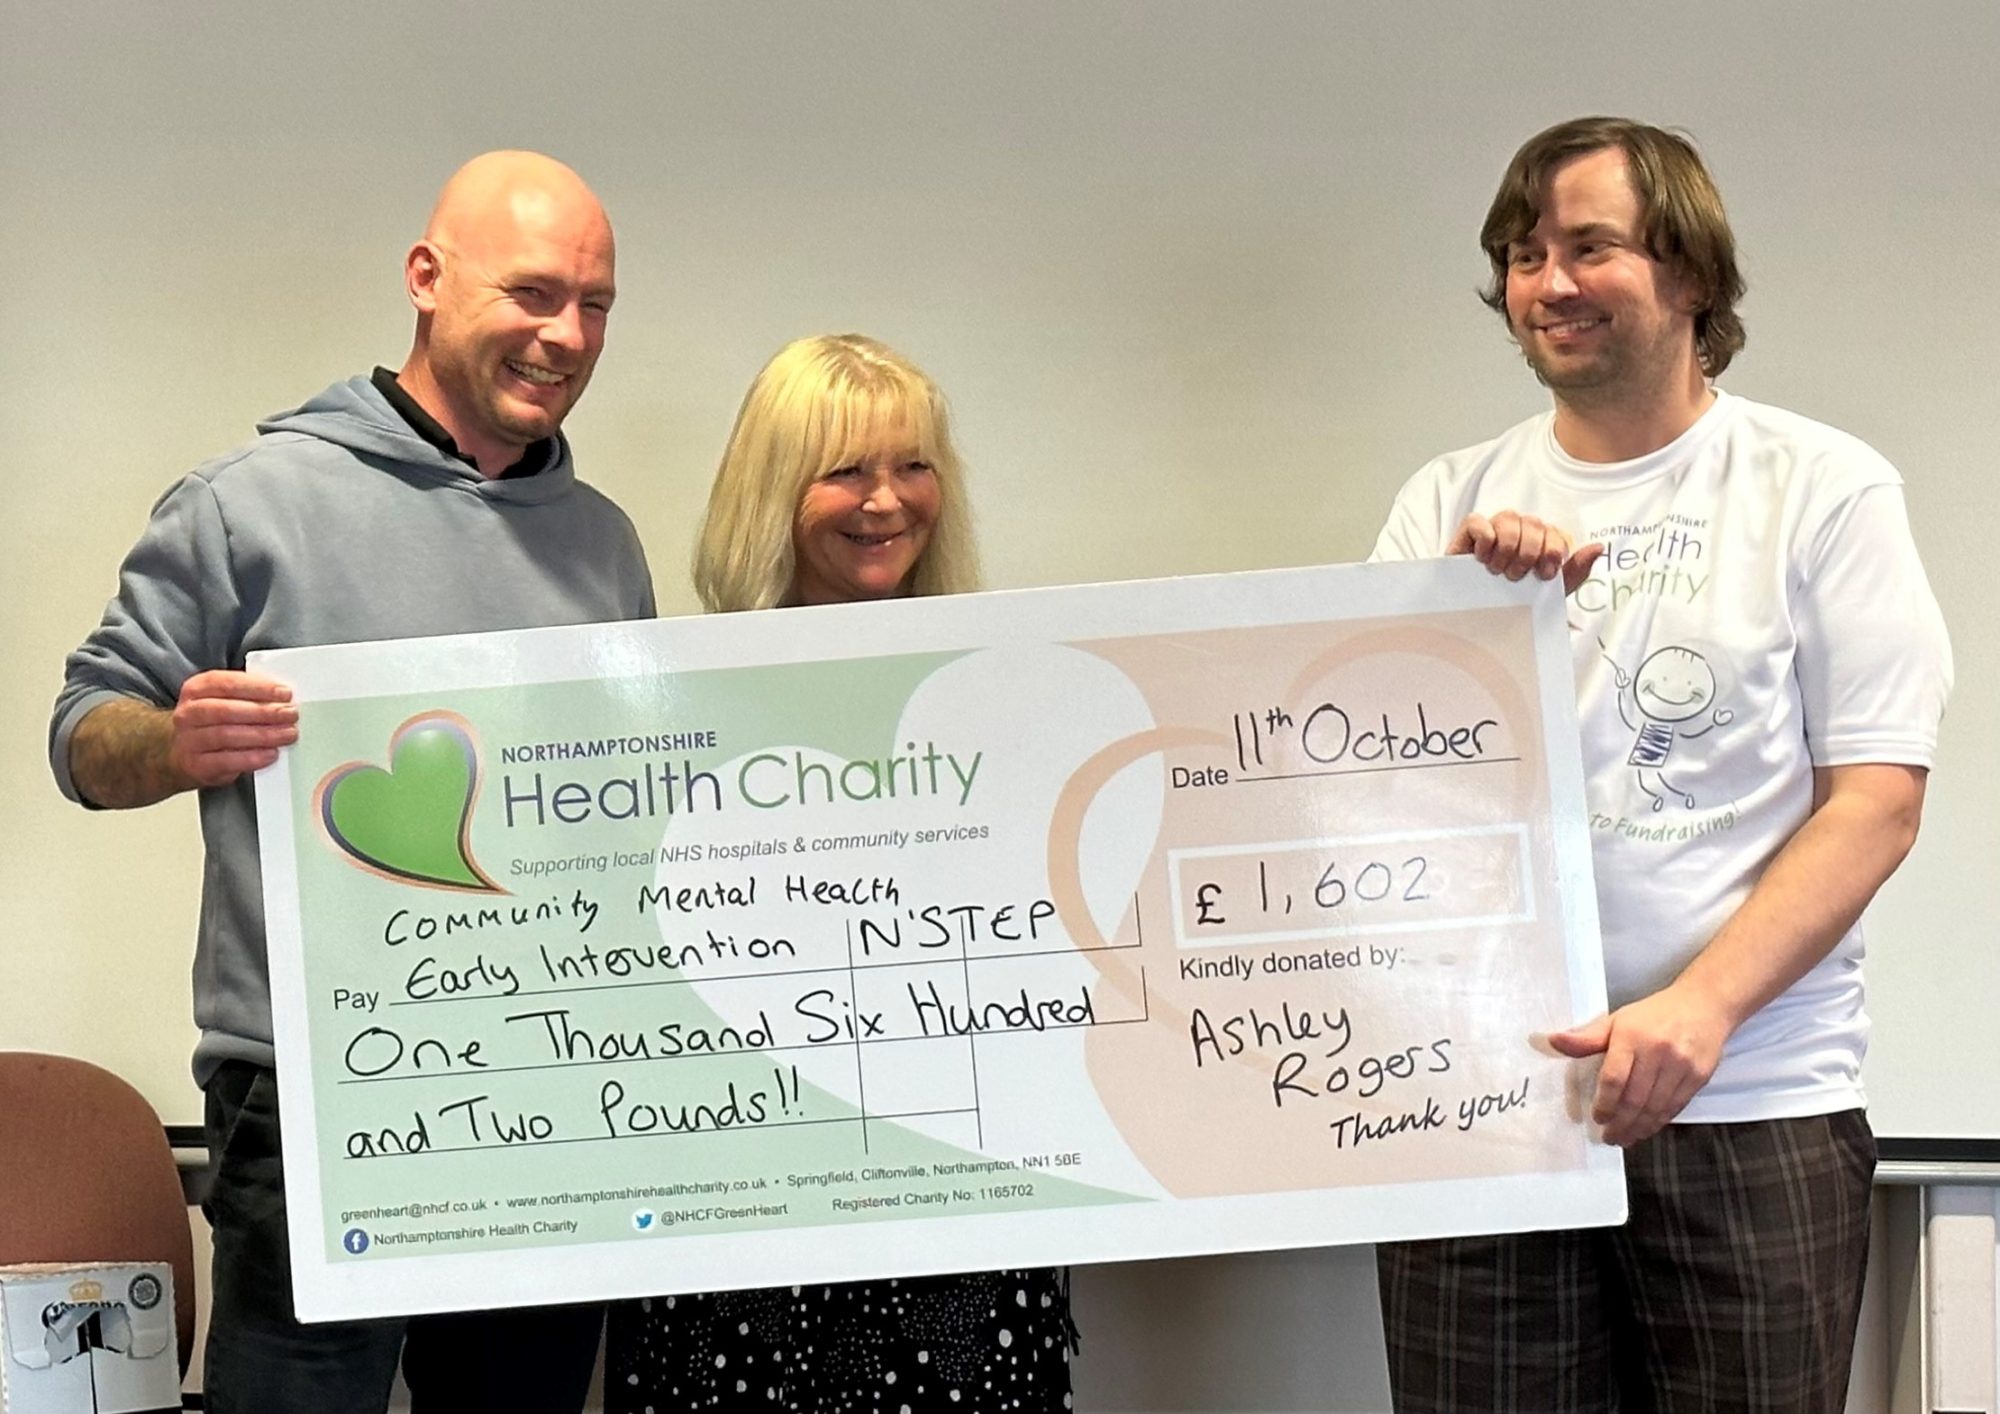 Ash Rogers raised money to support local community mental health team